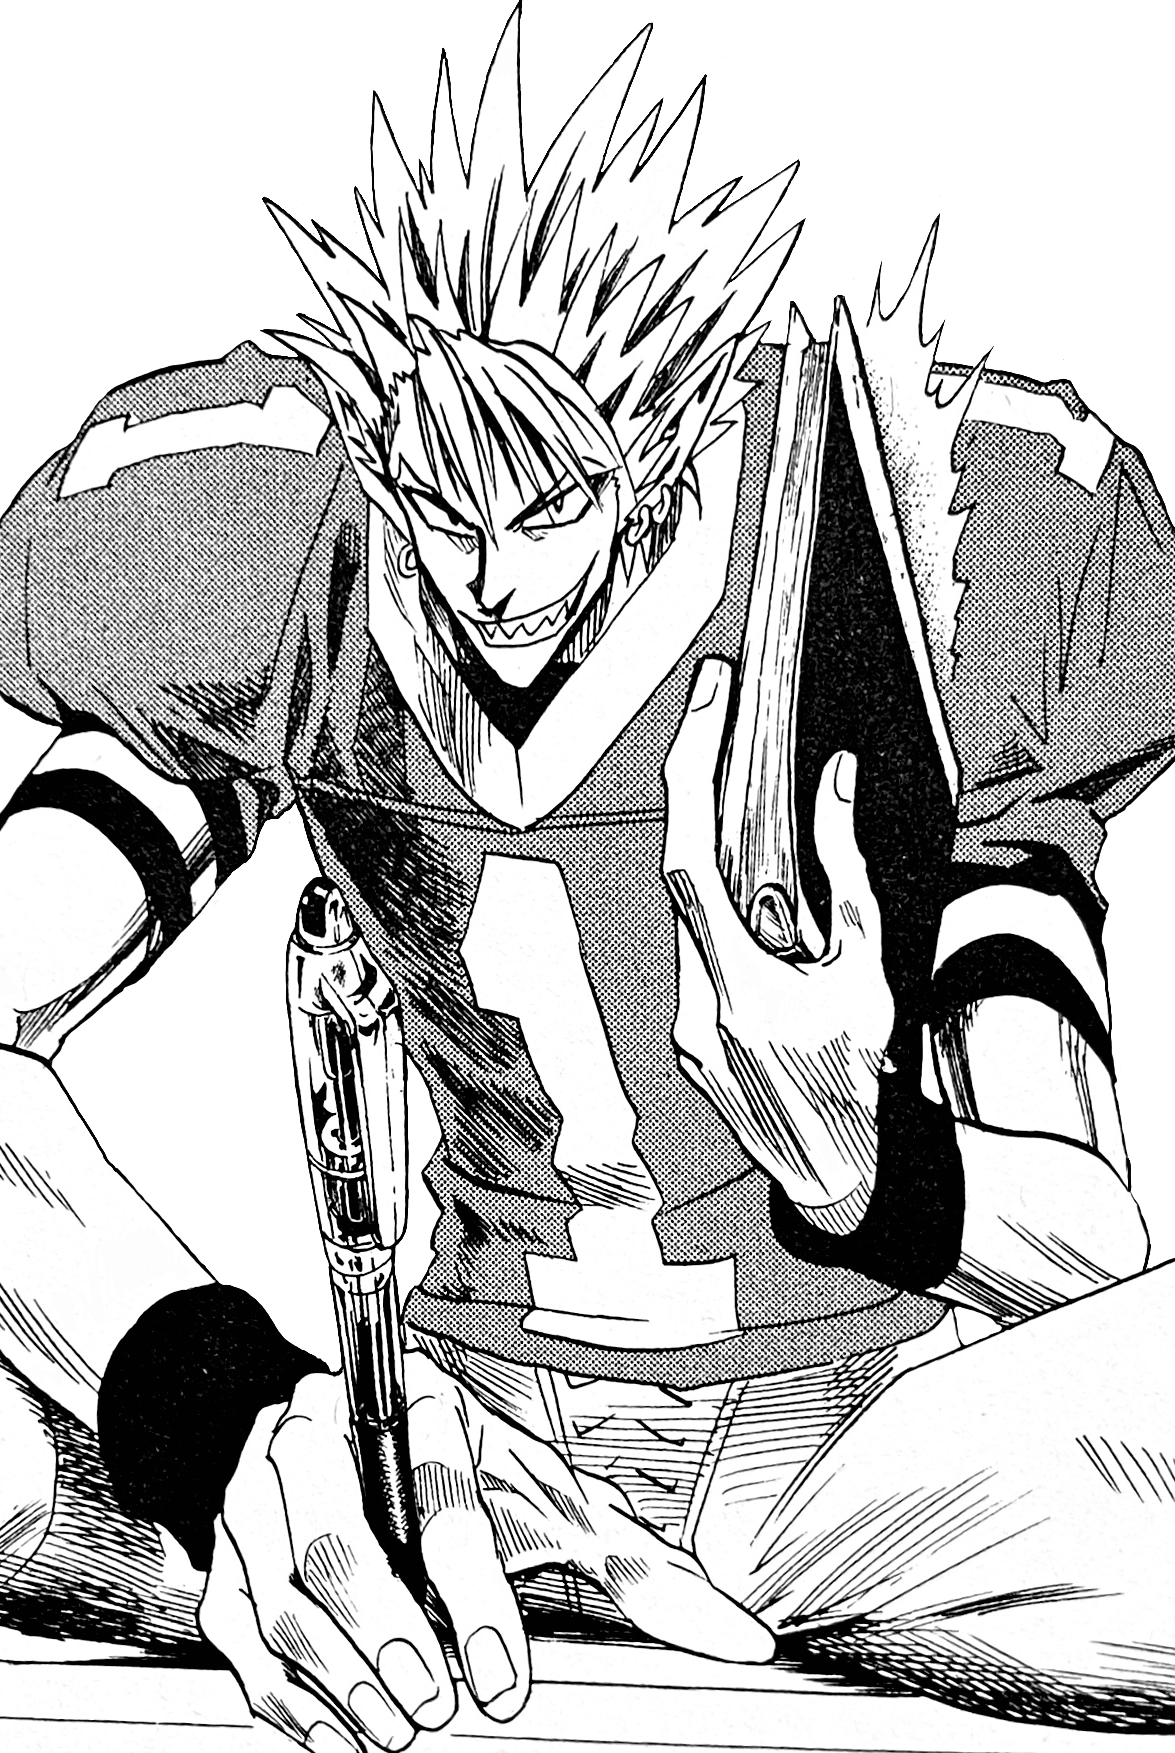 A transparent illustration of Hiruma in his team uniform. He's grinning, holding a pen between the fingers of one hand and slamming a binder shut with the other hand.